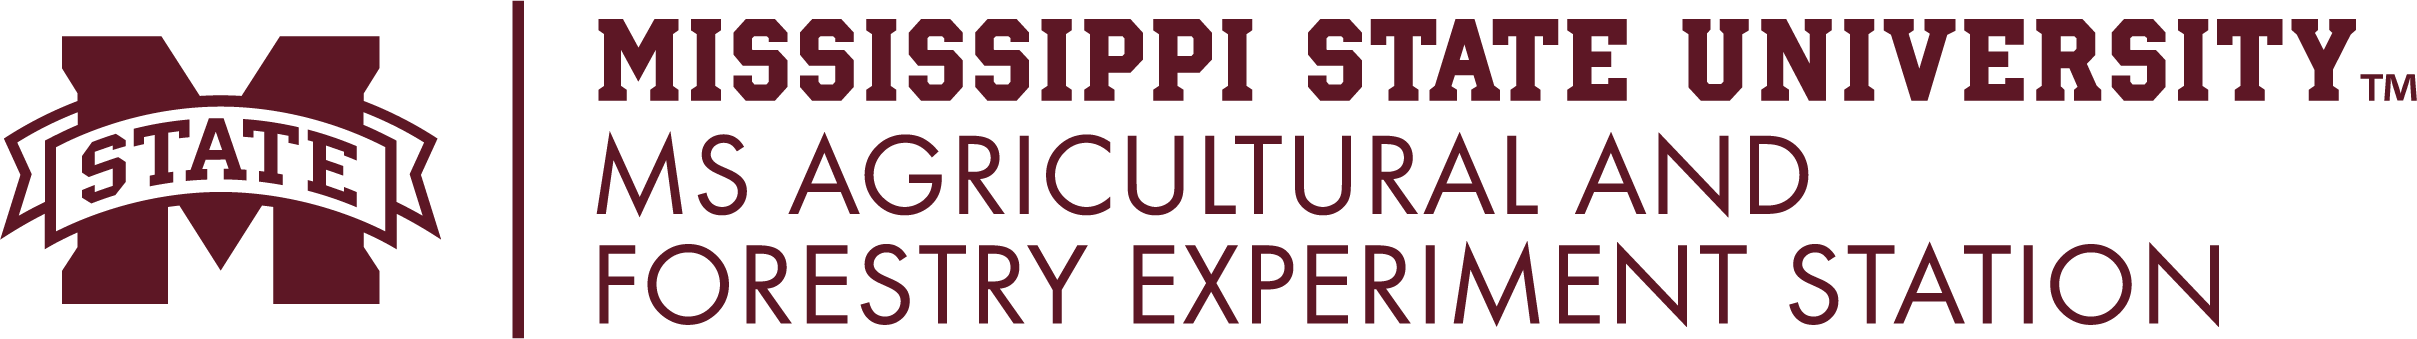 Mississippi State University MS Agricultural Forestry and Experiment Station logo